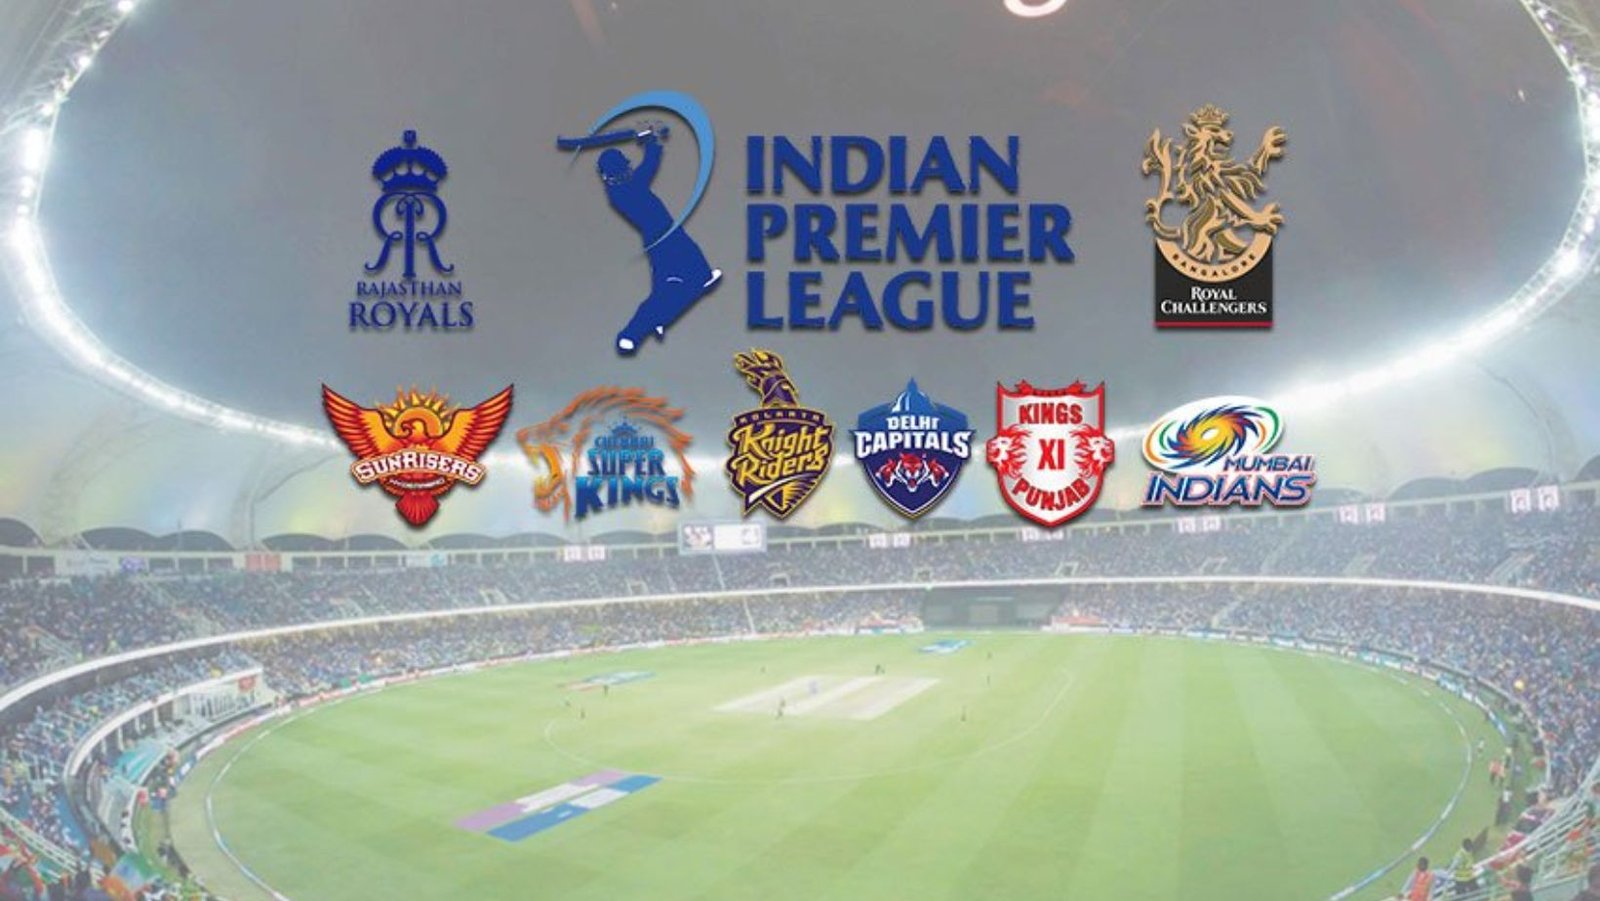 According to reports, IPL franchises have purchased all six teams in South Africa's new T20 league